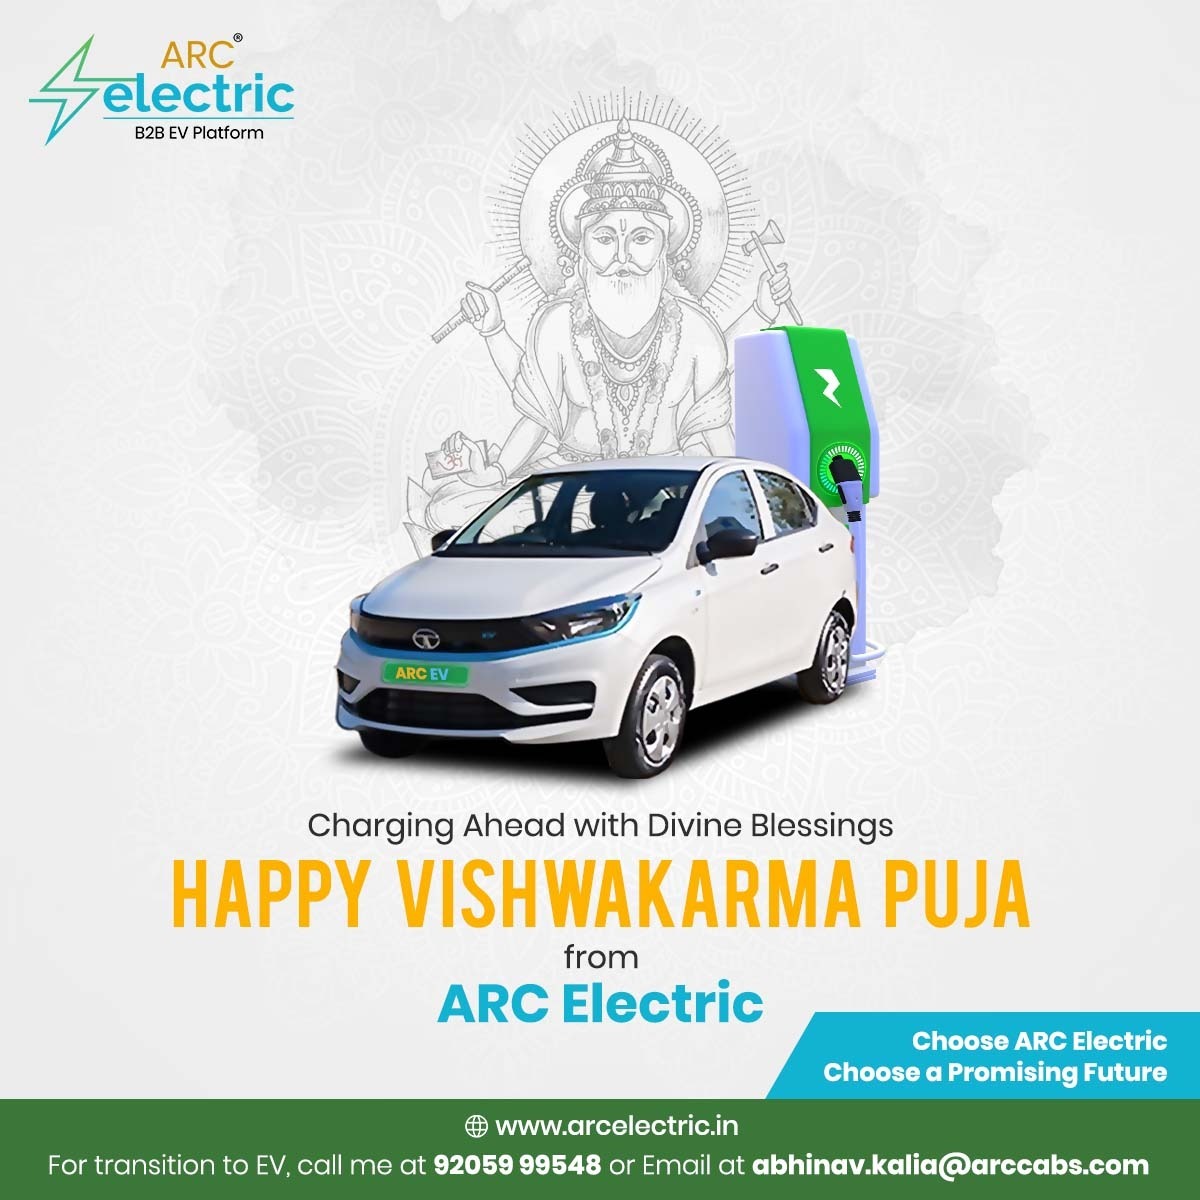 Let's power towards a brighter future with the divine blessings of Lord Vishwakarma. 

#ArcElectric #ArcCabs #DivineDesigns #VishwakarmaBlessings #CraftingSuccess #CreatorsDay #DivineArchitect #CraftingTheFuture #InspiredInnovations #CelebratingCraftsmanship #CraftingLegacy